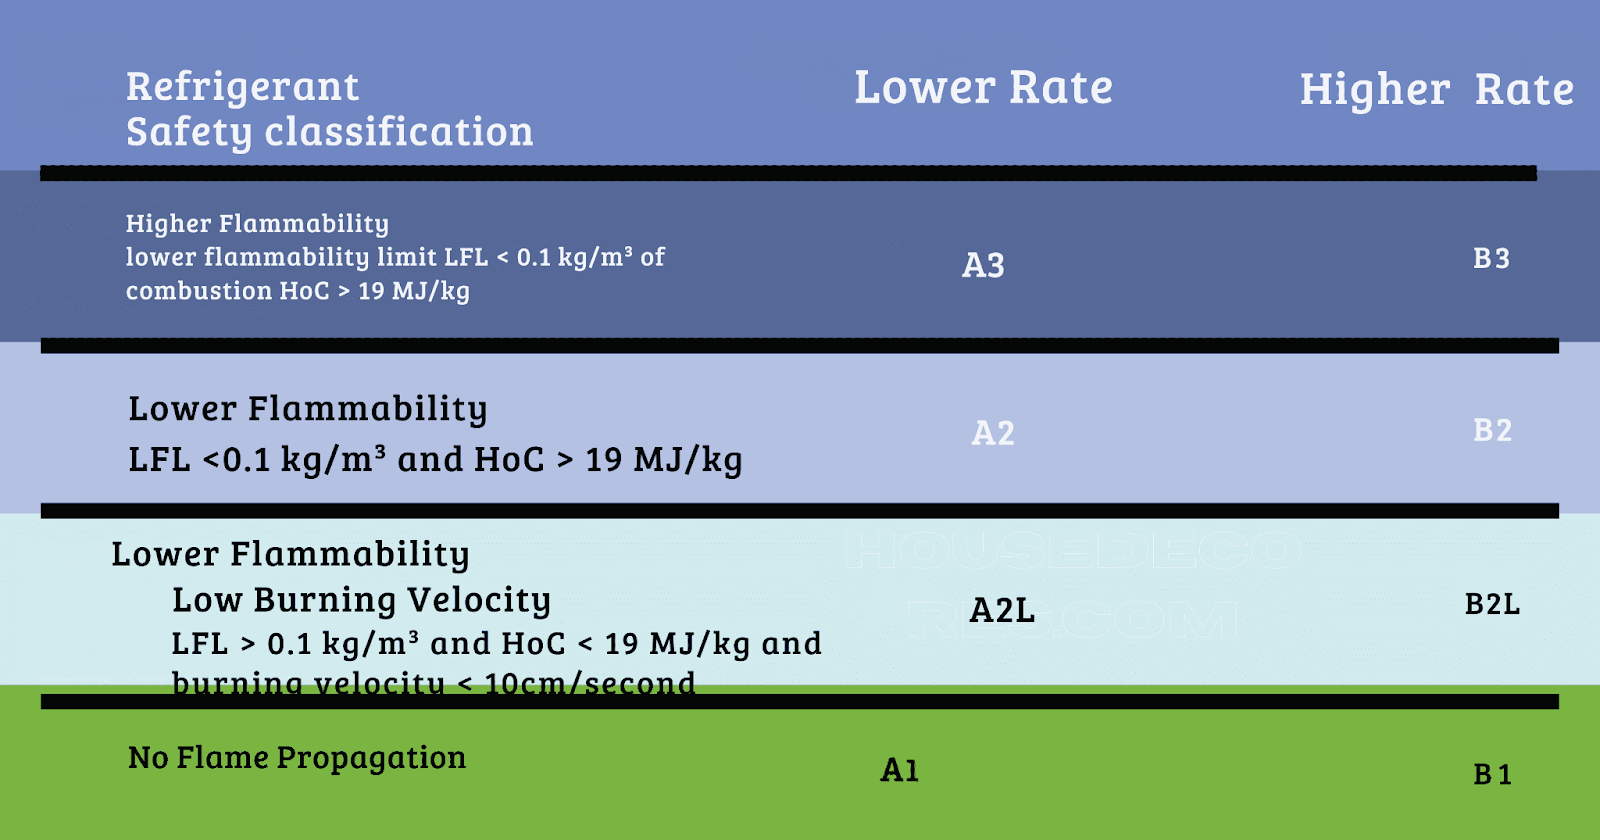 Refrigerant Safety Classification  from higher to lower